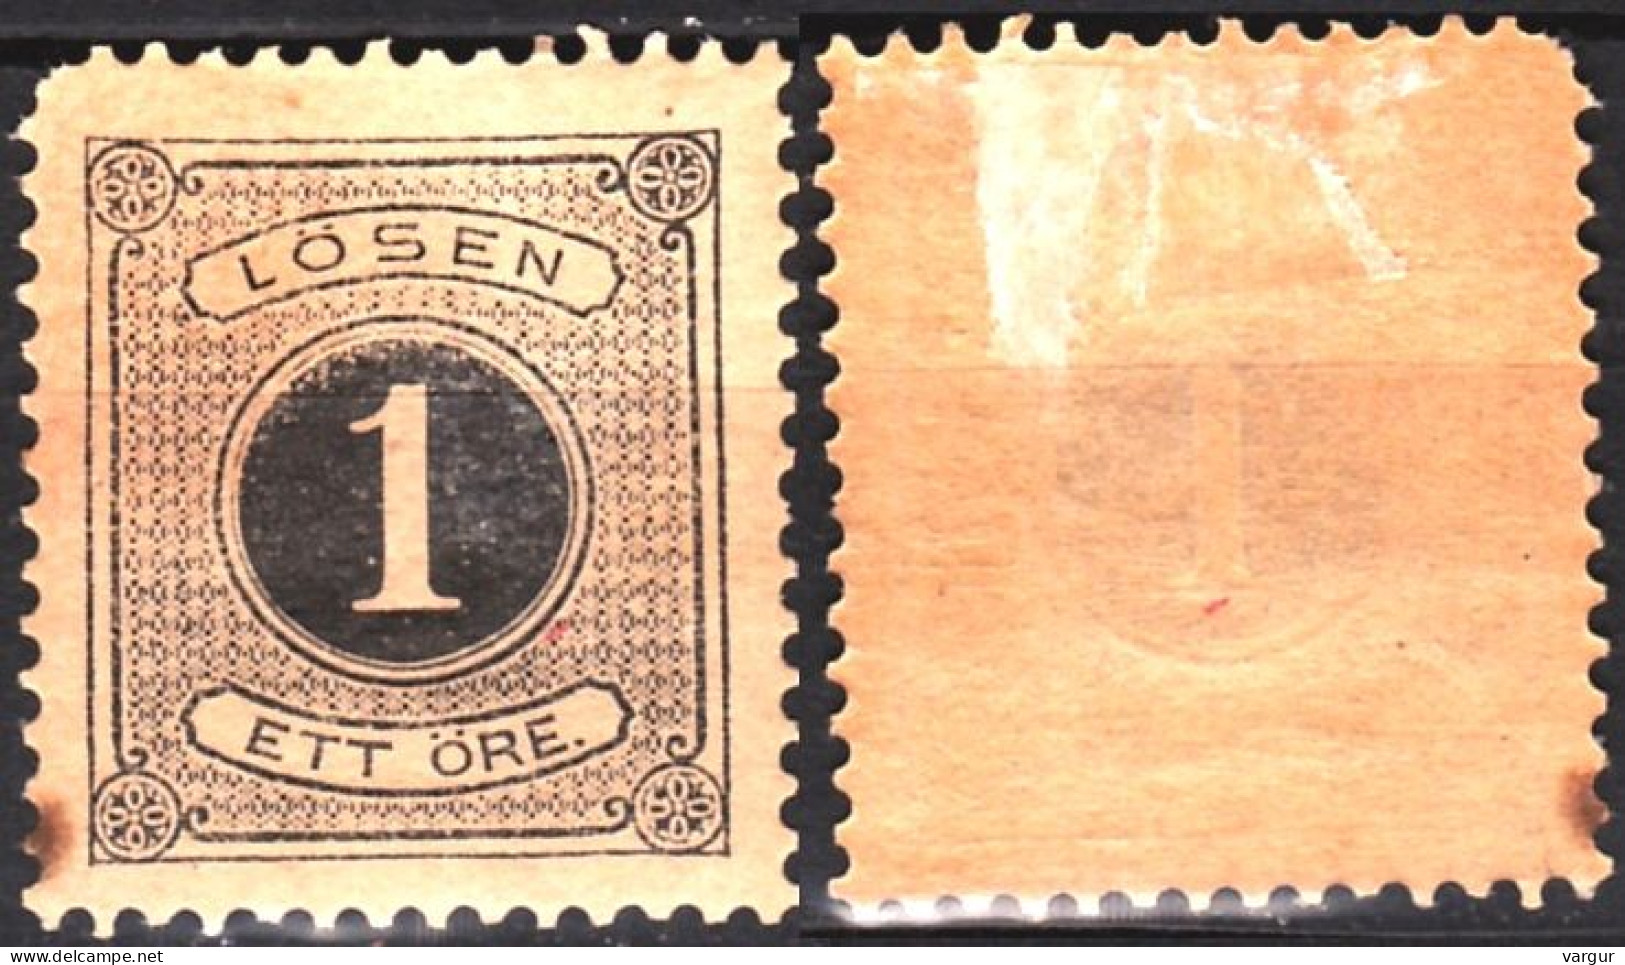 SWEDEN Postage Due 1877 Figure In Circle. 1o Black. Perf 13, MH Lot #1 - Impuestos